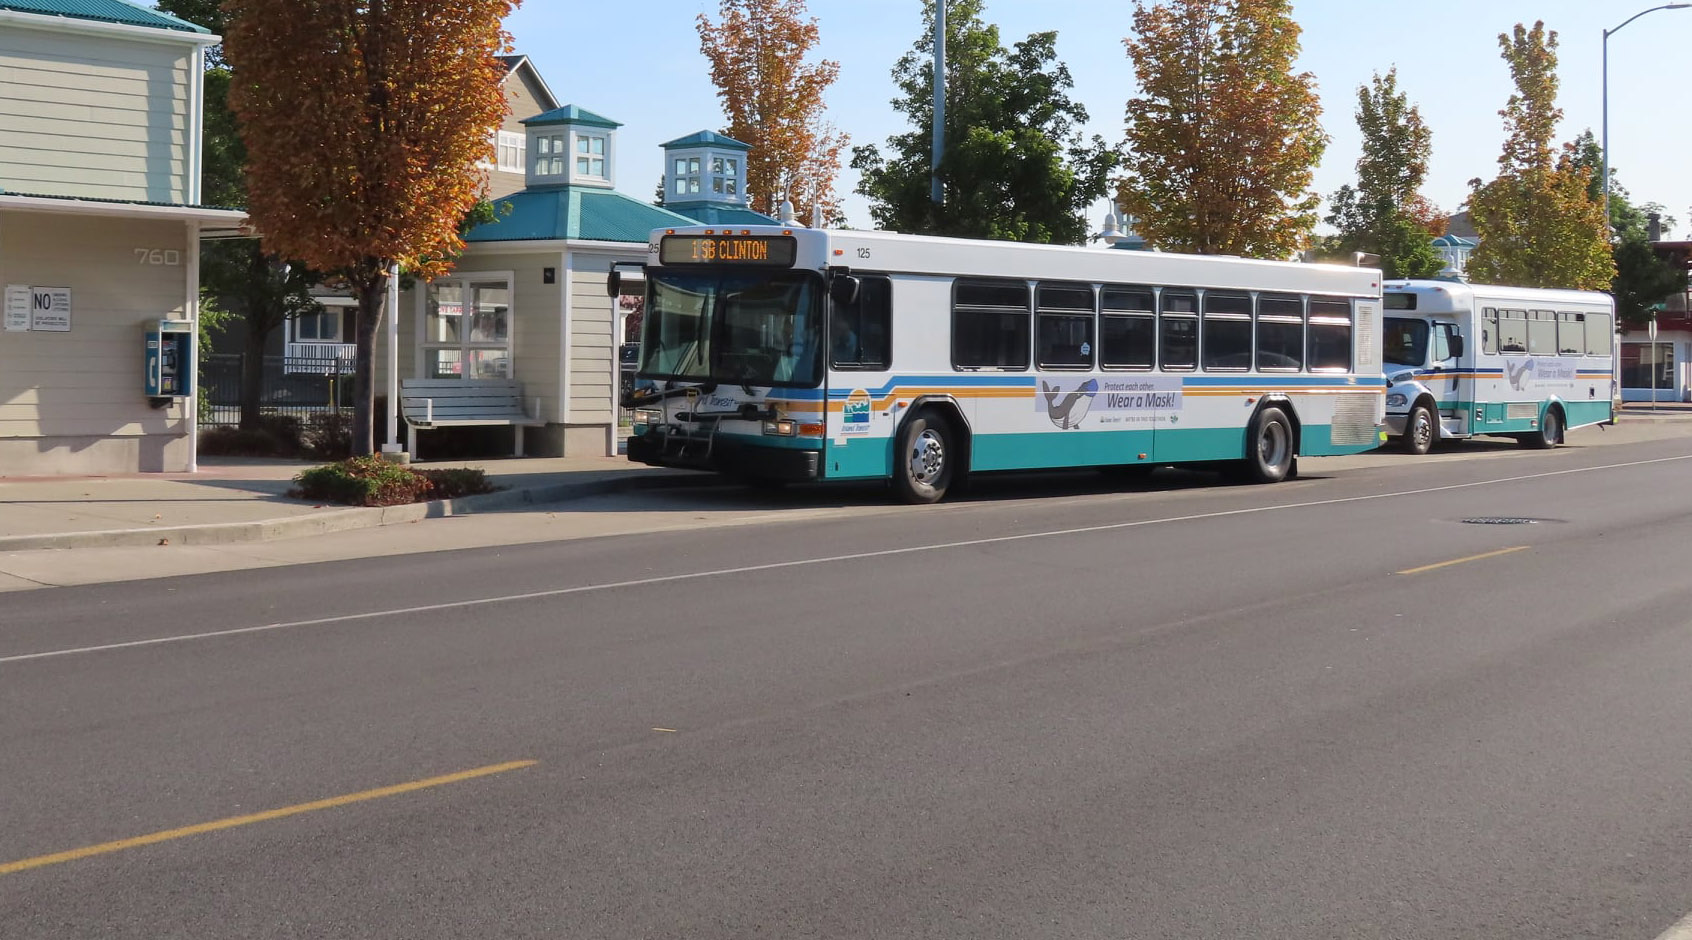 Island Transit tours and events on Whidbey Island